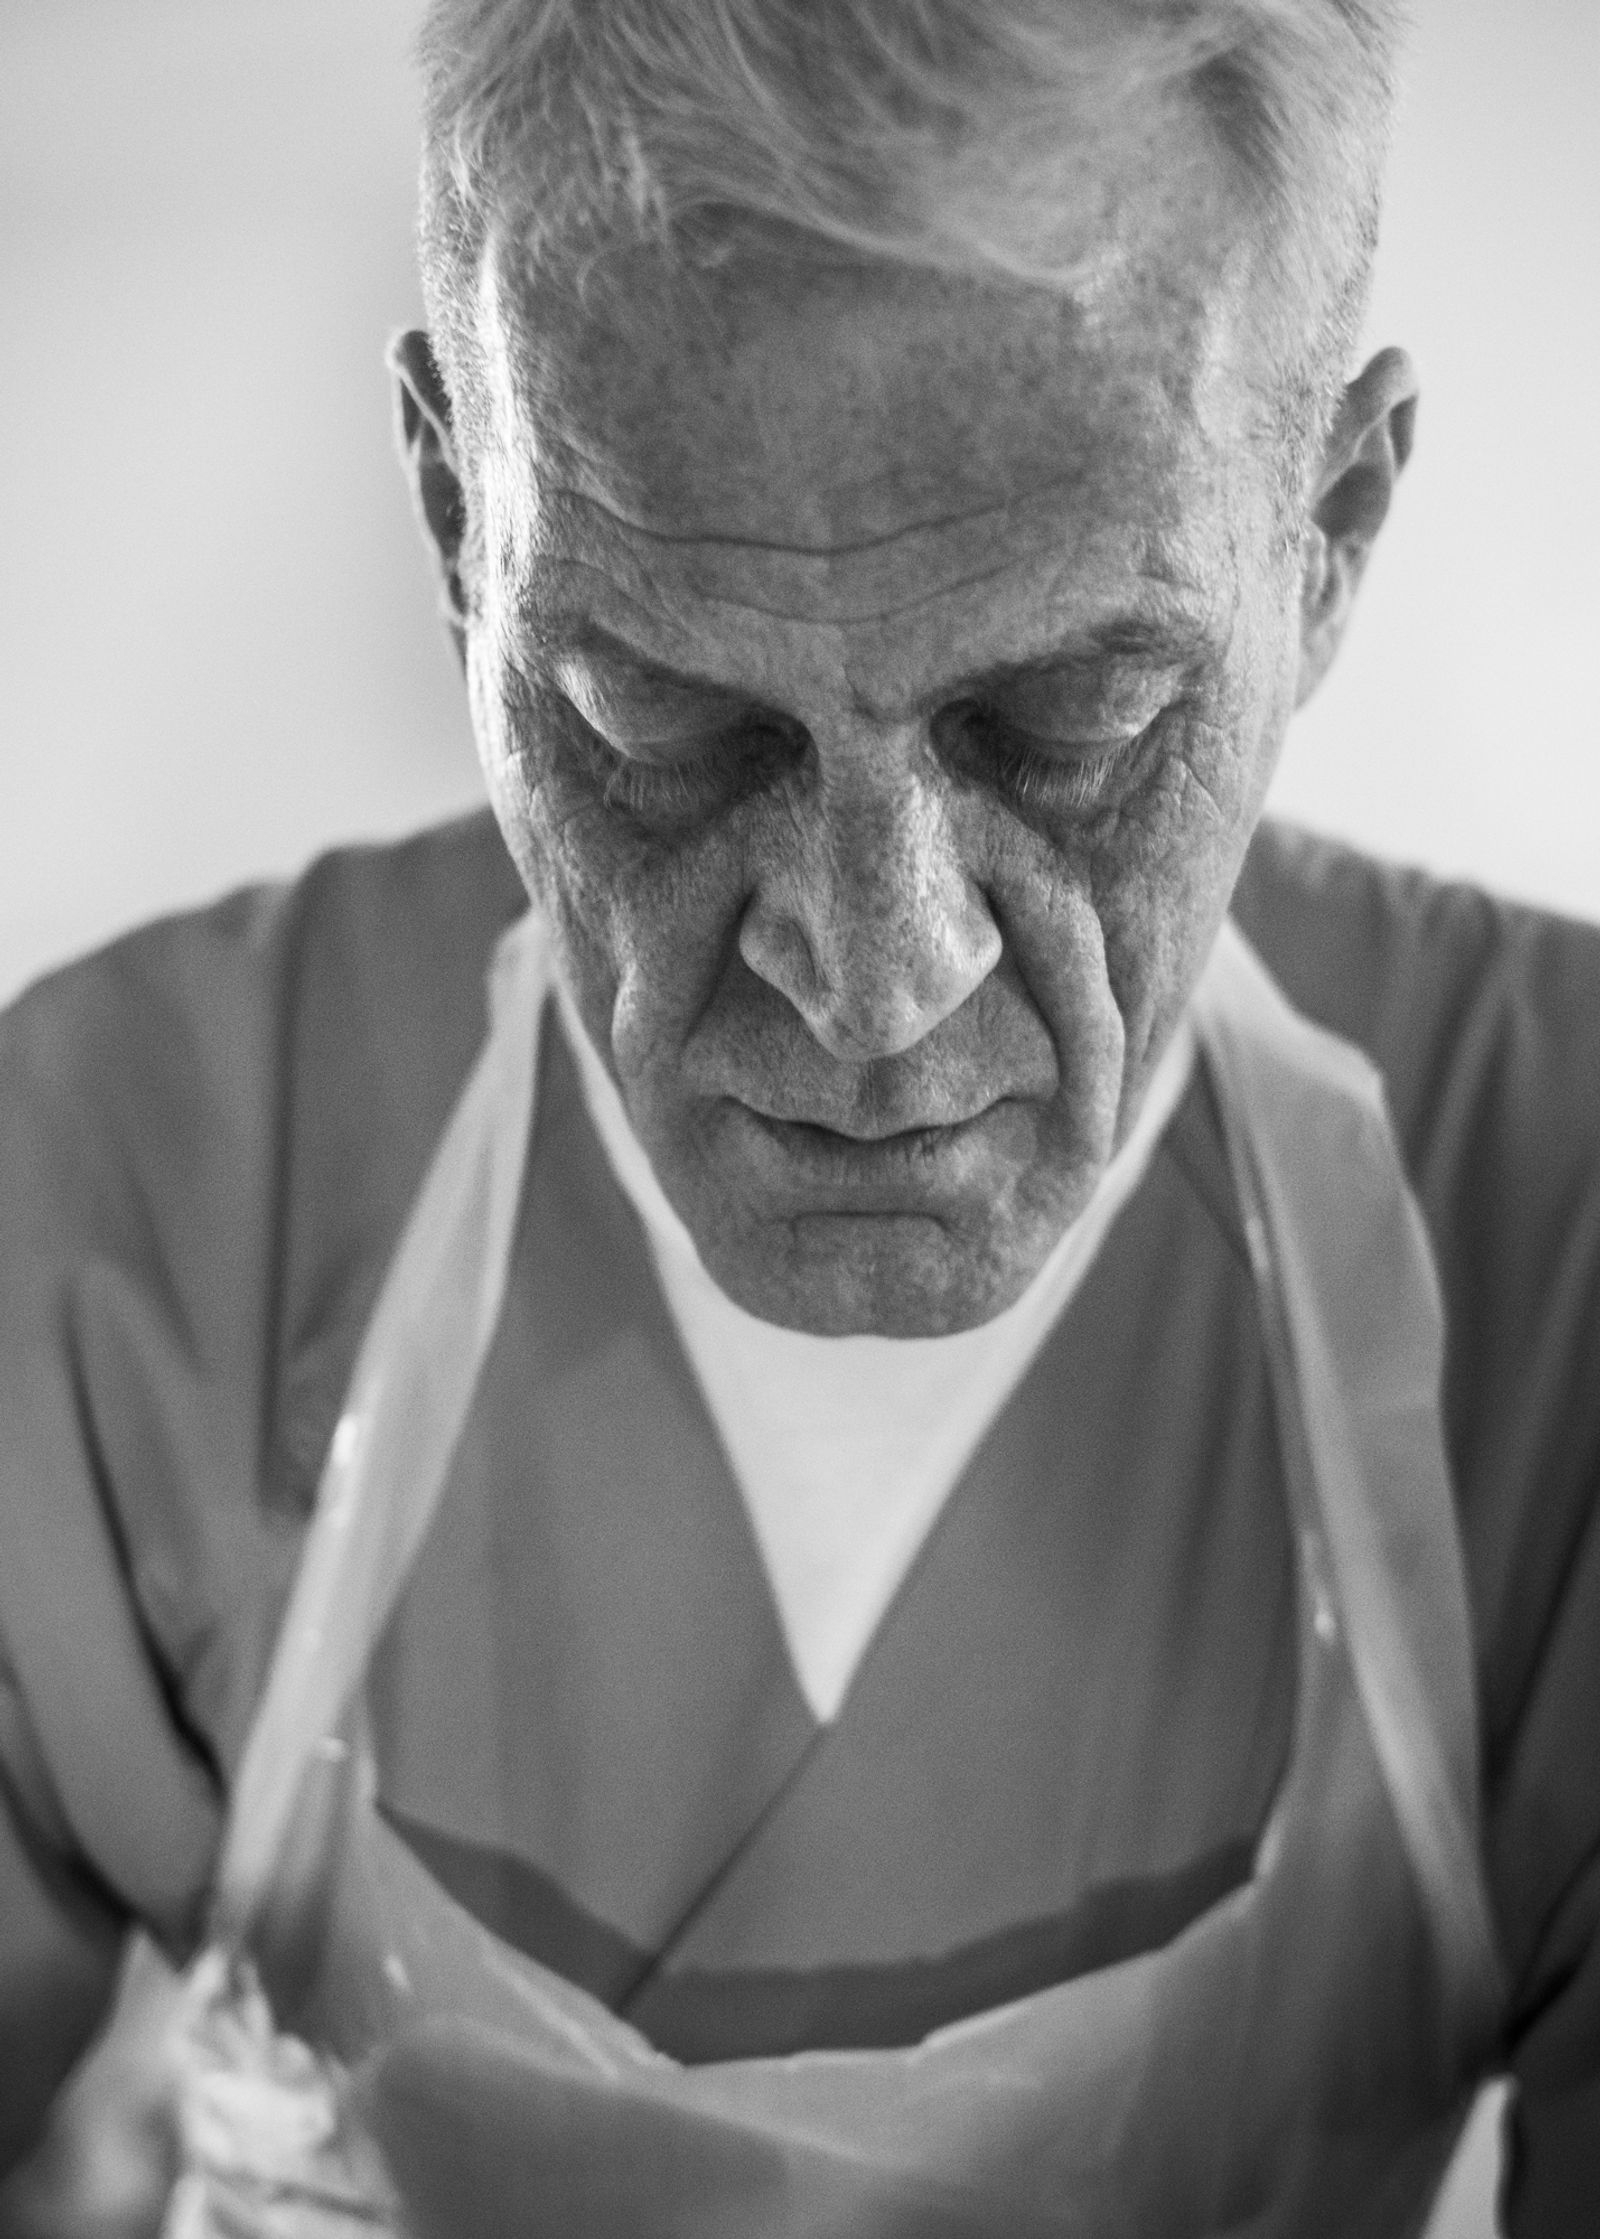 © Patricia Kühfuss - Image from the Never Done - Nurses in German Hospitals photography project